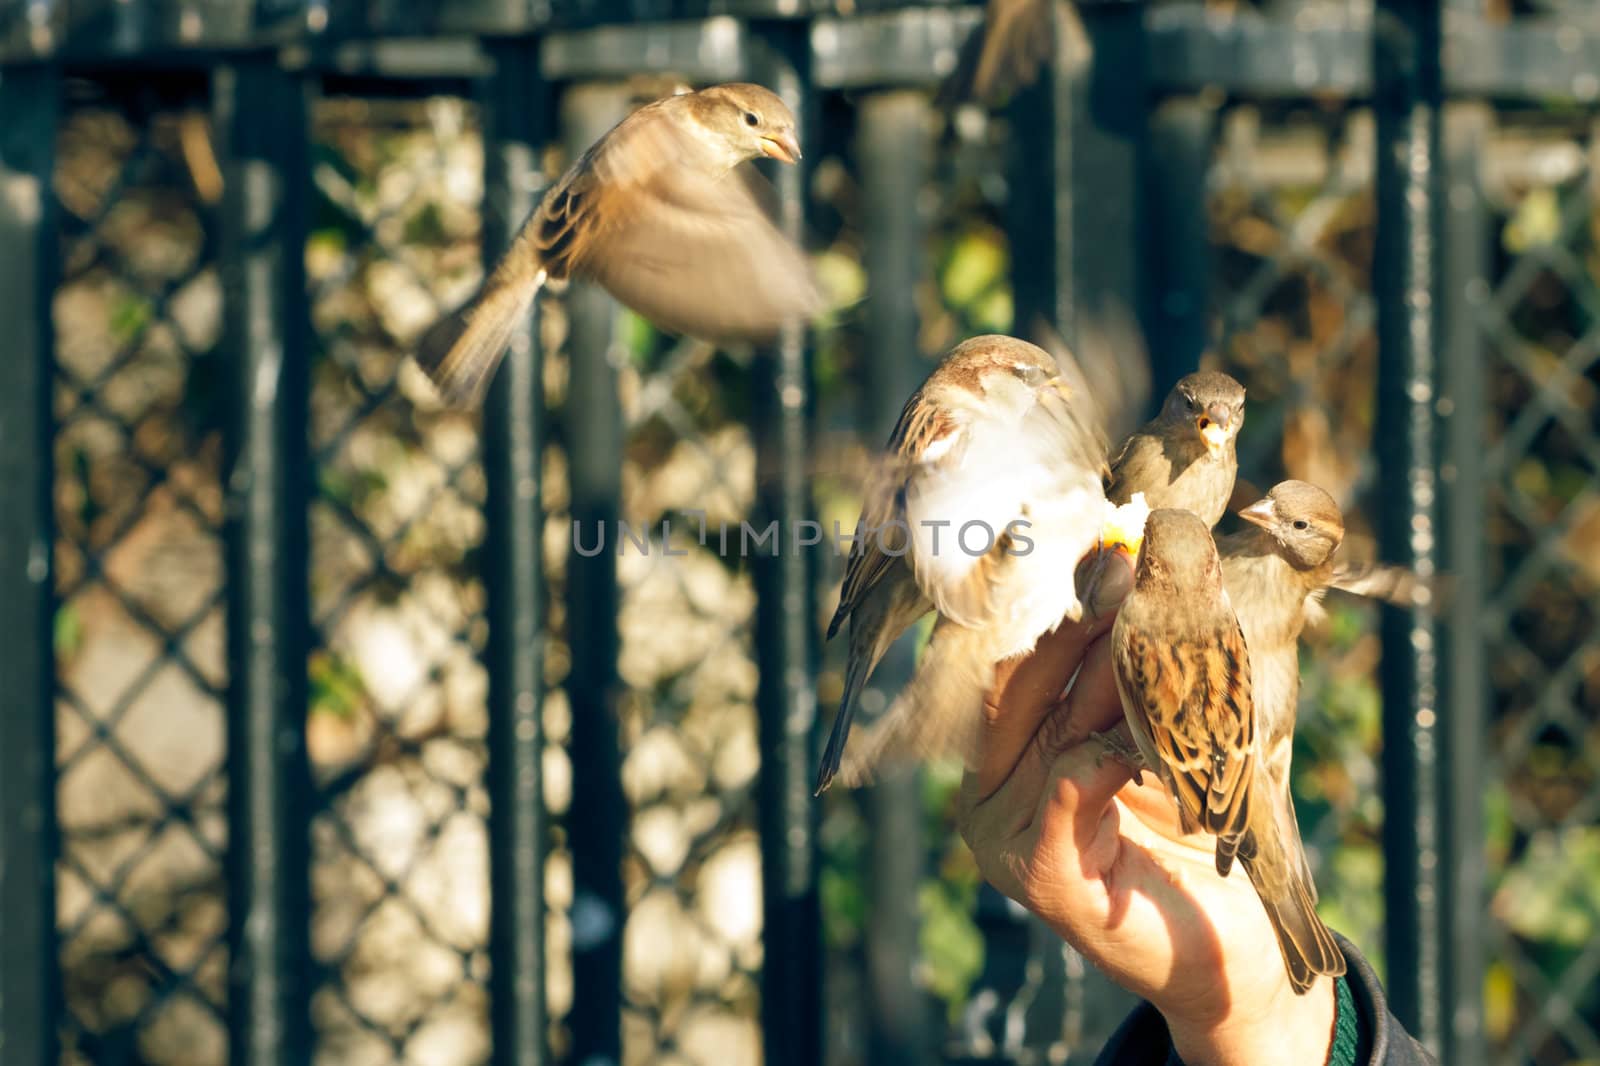 Sparrows eating from a human hand with motion blurred wings, horizontal shot